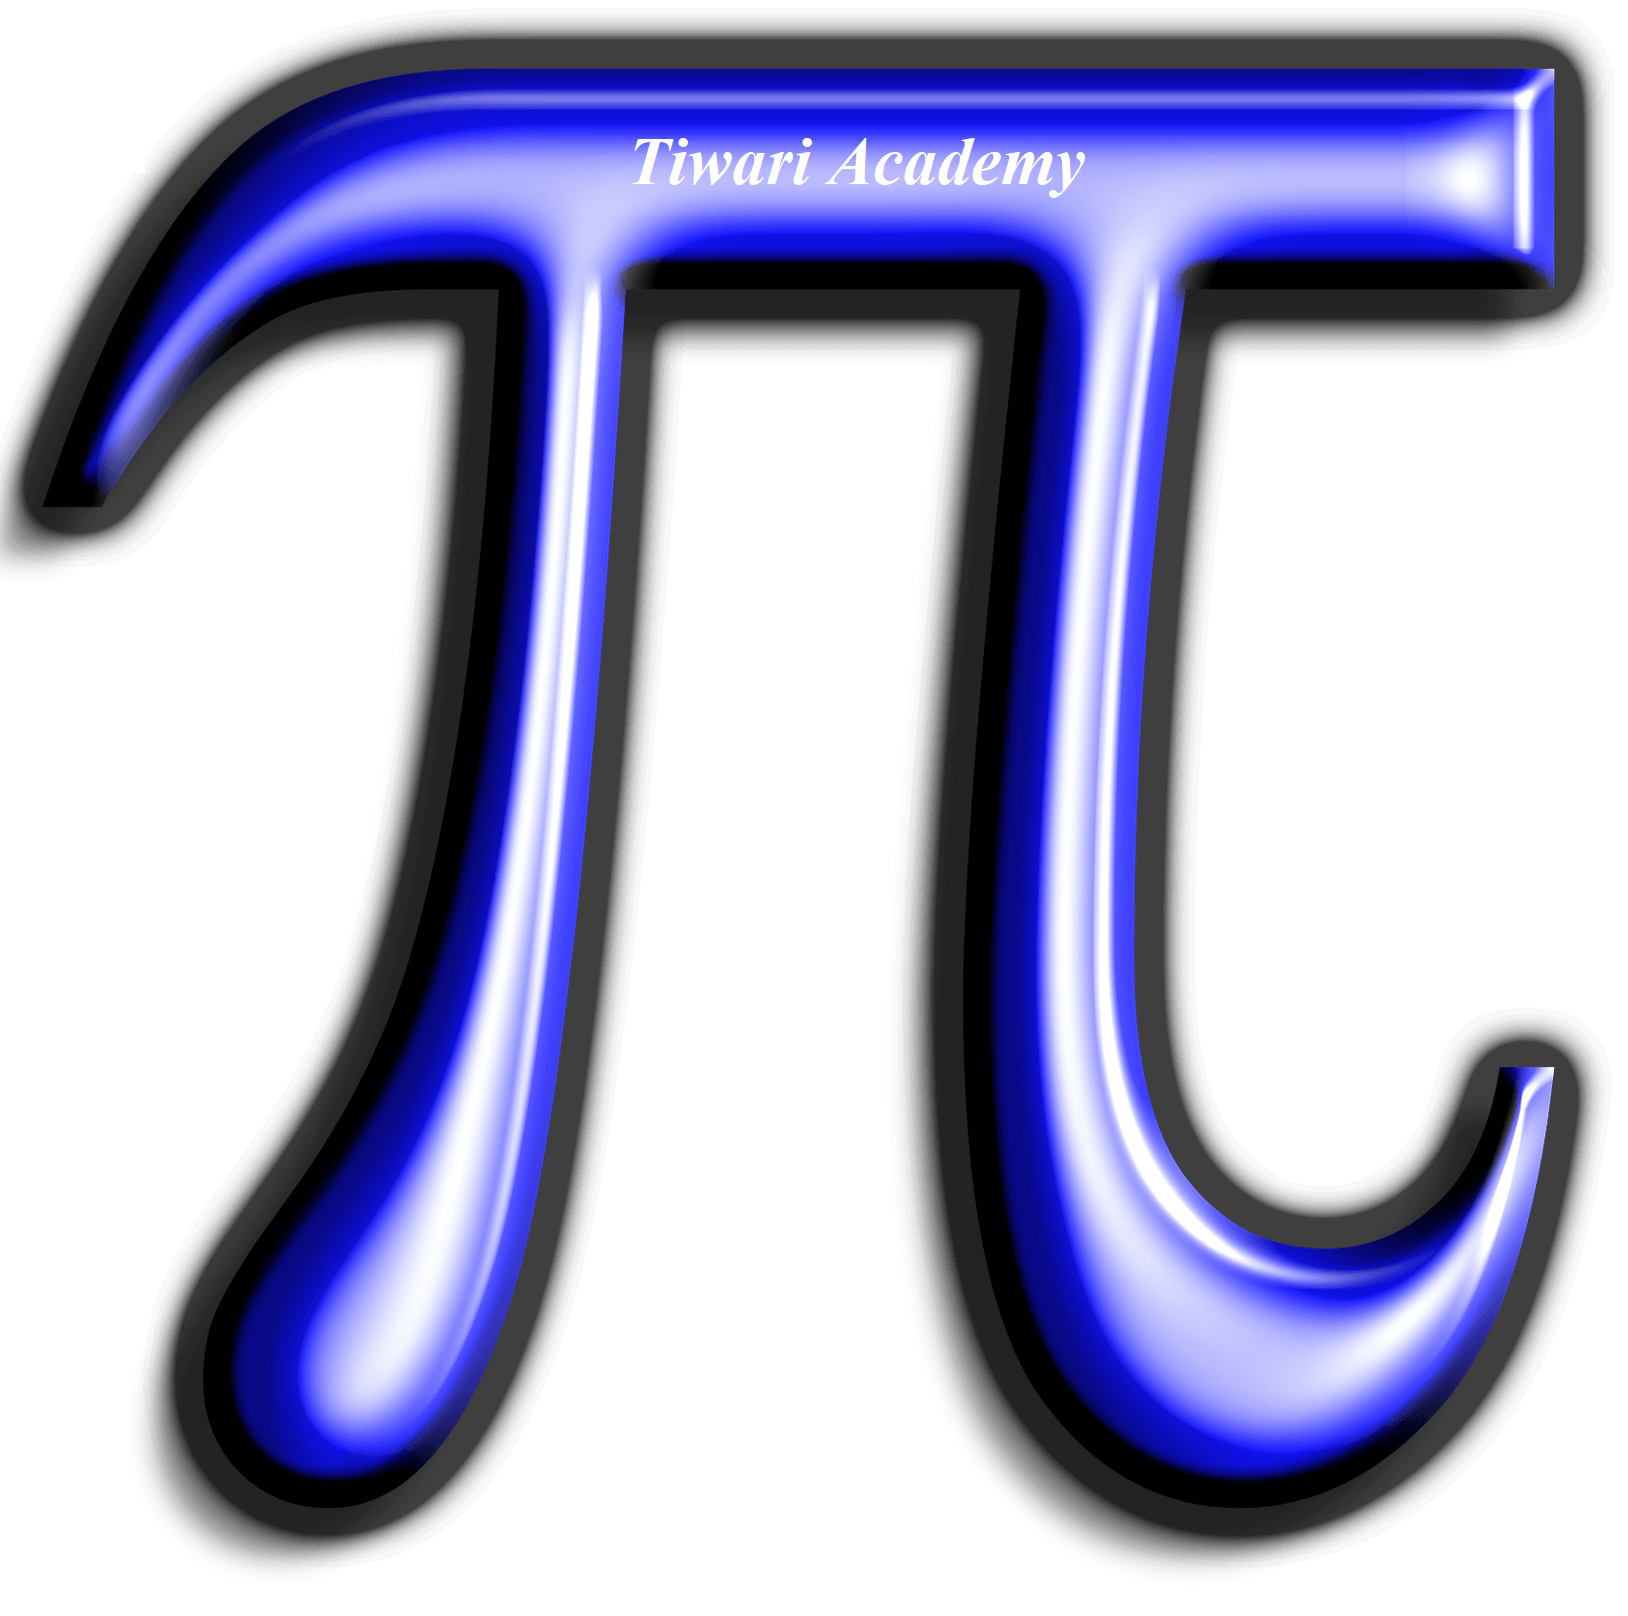 pi-3.14 - an irrational number